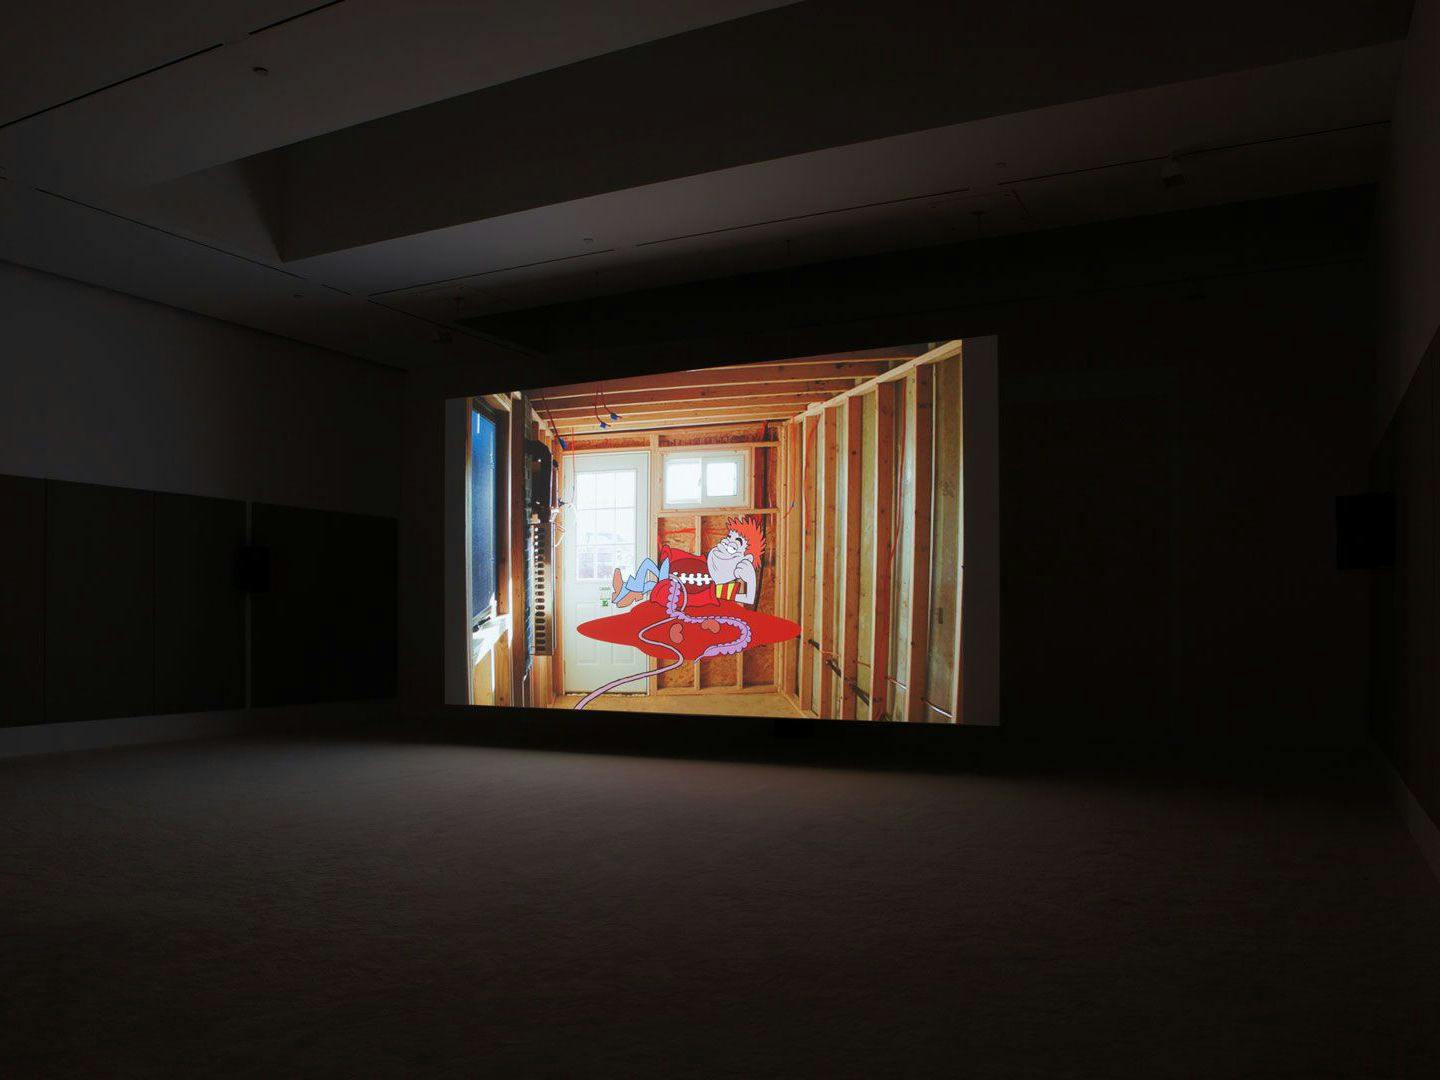 An installation view of a video work by Jordan Wolfson, titled Raspberry Poser, dated 2012.